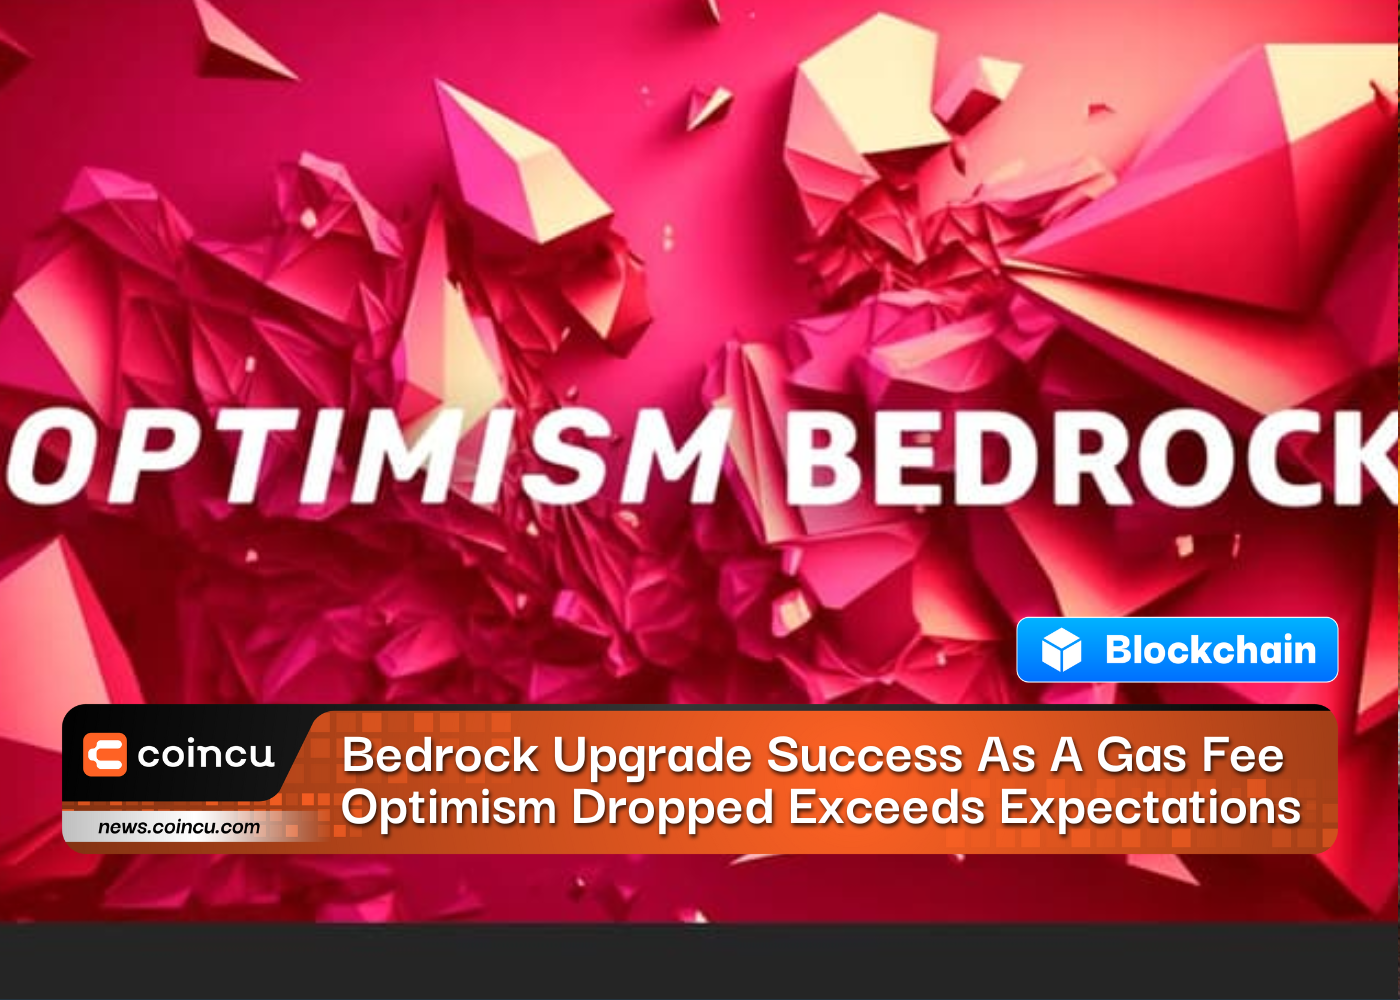 Bedrock Upgrade Success As A Gas Fee Optimism Dropped Exceeds Expectations